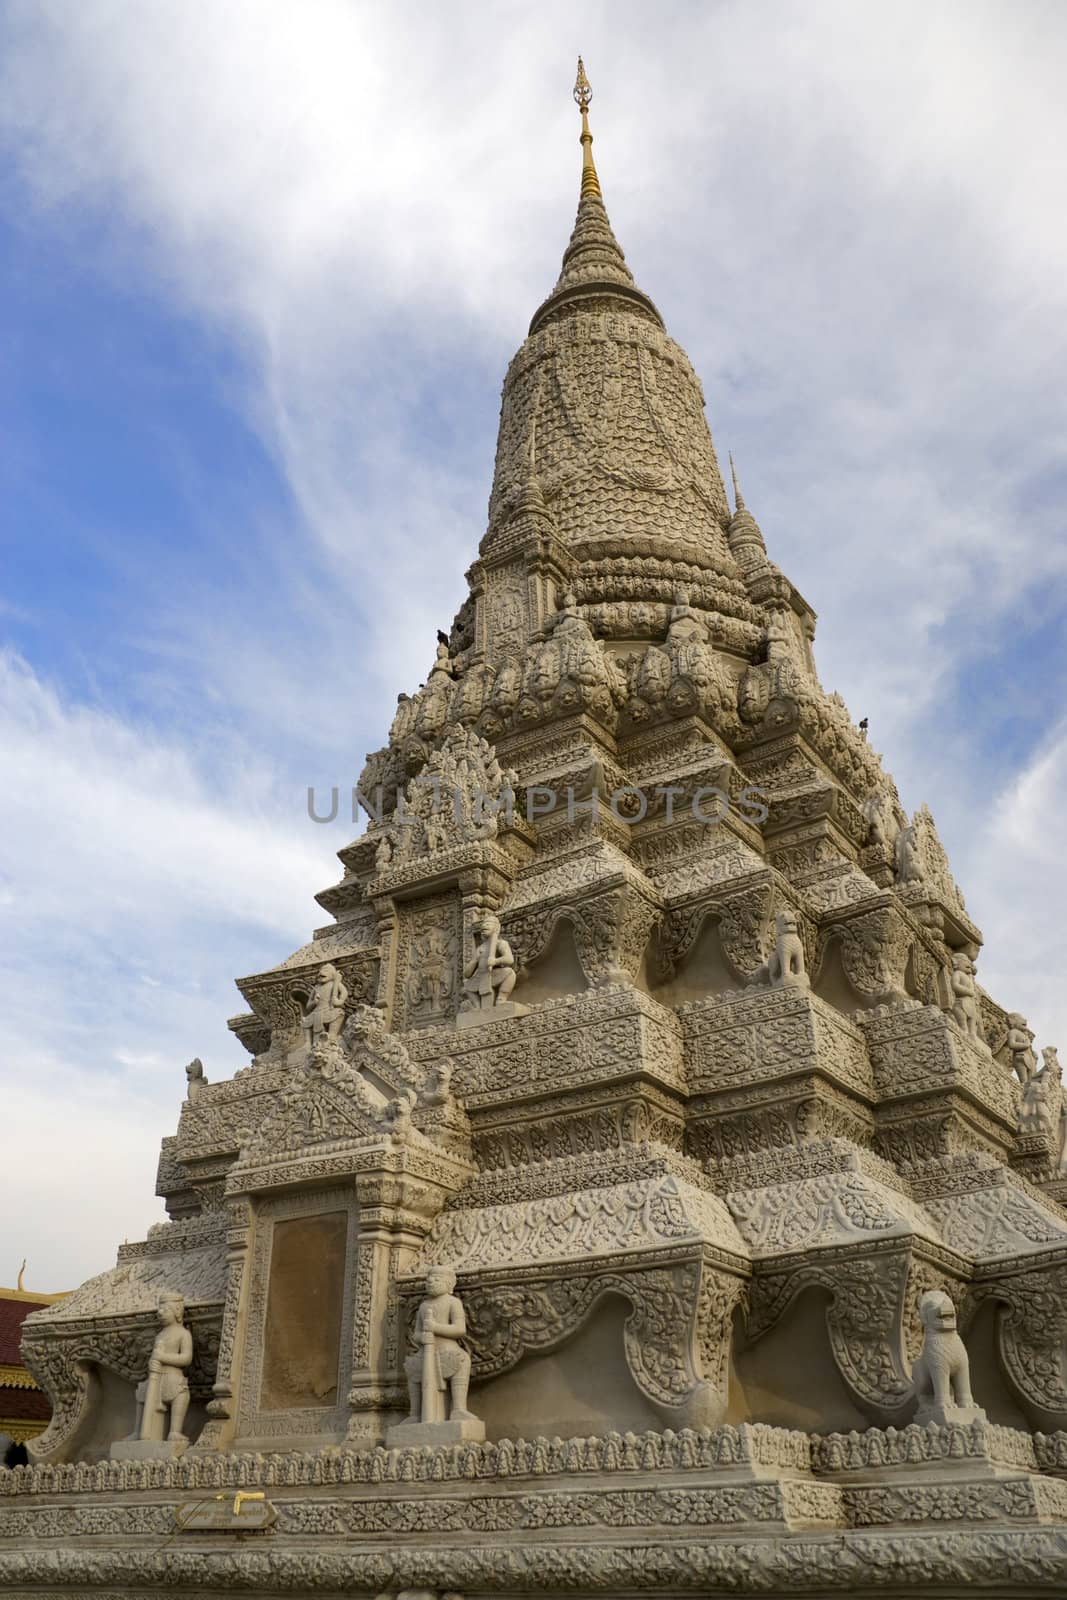 Image of one of the Silver Pagodas, located within the Royal Palace grounds at Phnom Penh, Cambodia.